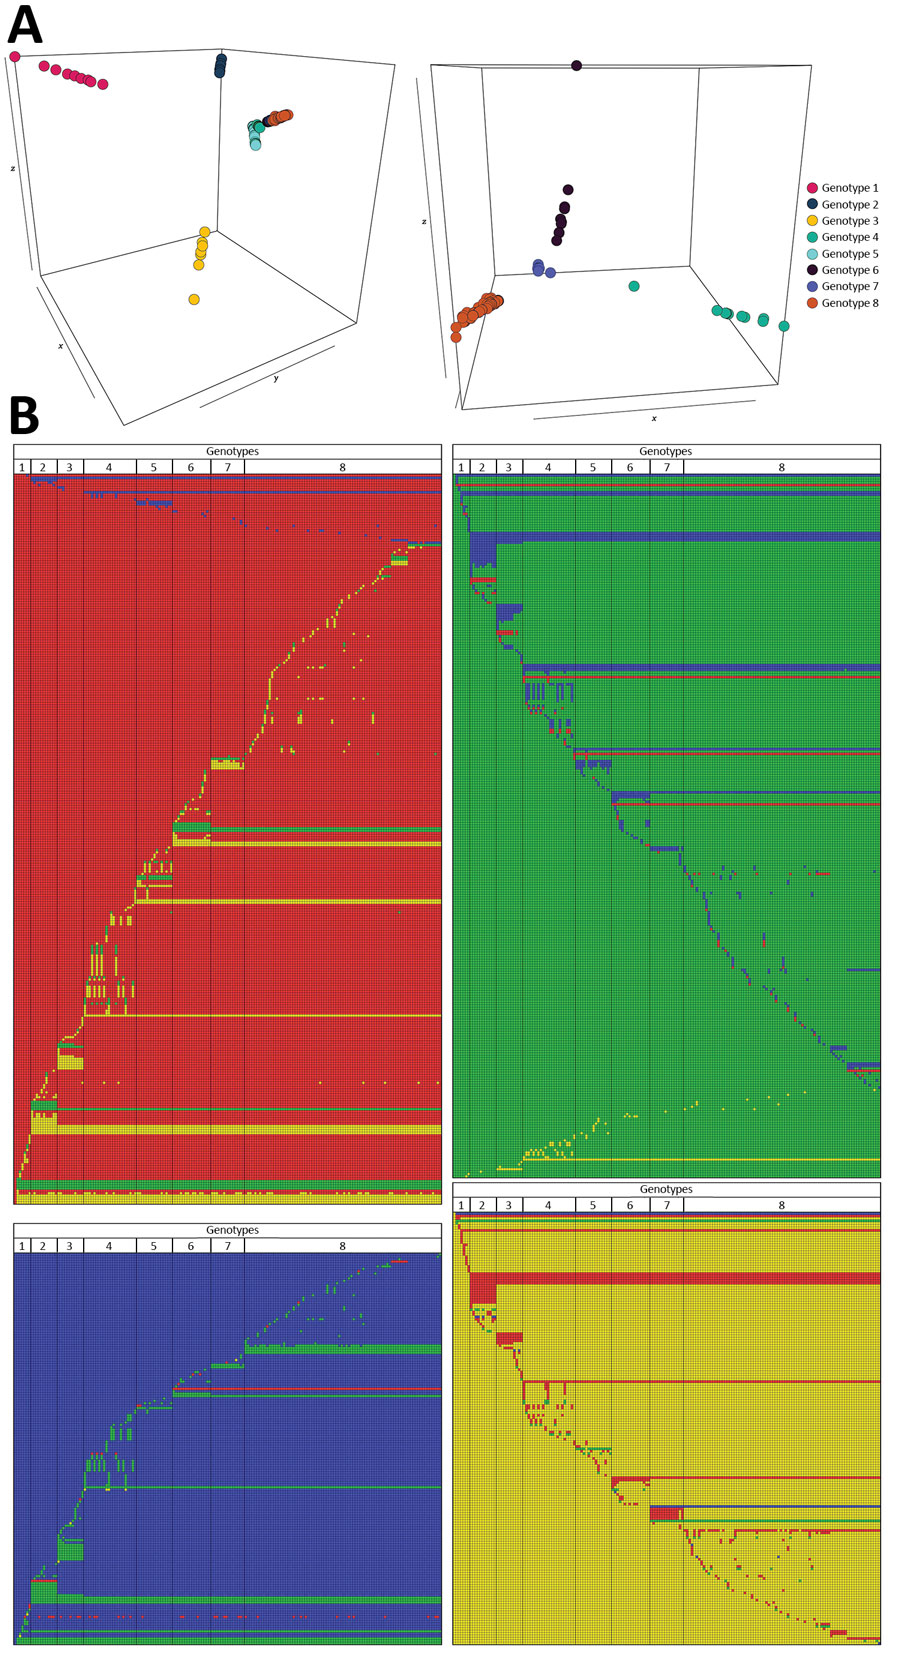 Graphical representations of the 8 Mycobacterium ulcerans genomes and their 940 single-nucleotide polymorphisms from Buruli ulcer patients in Benin and Nigeria. A) Principal component analysis (PCA) projection on the first 3 principal components with 8 groups of genomes clustering together, which we defined as genotypes. PCA was performed based on the Eigenstrat algorithm but applied to a haploid organism. Image on the left displays a PCA performed on all 174 genomes; image on the right displays